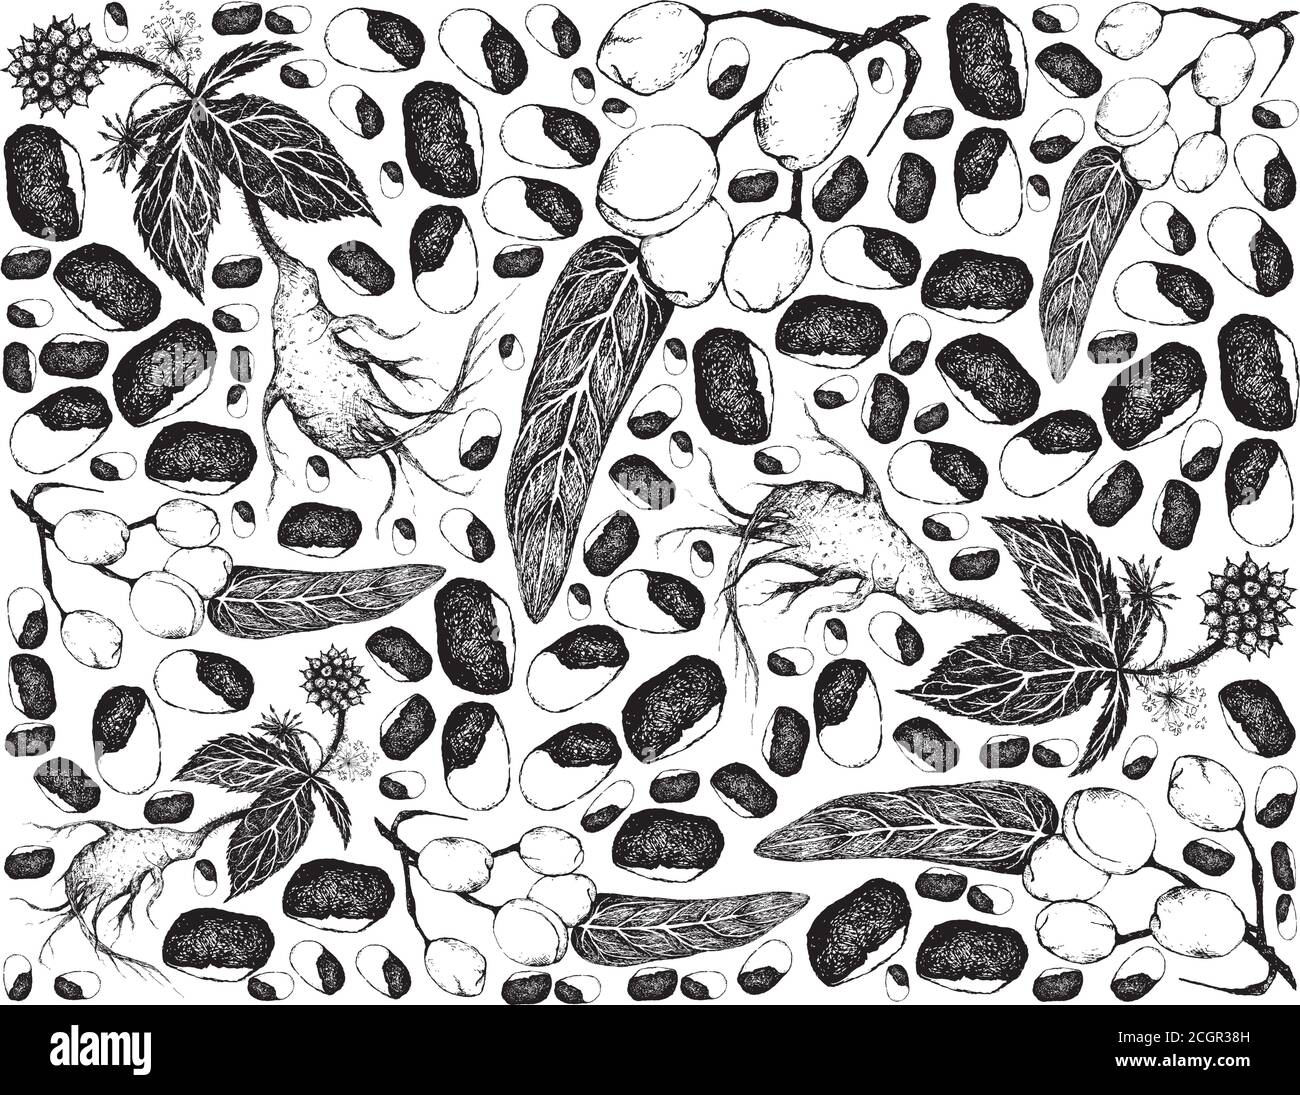 Nut and Bean, Illustration Hand Drawn Sketch Background of Wild Almond, Barking Deer’s Mango or Irvingia Malayana and Eleutherococcus Senticosus, Eleu Stock Vector